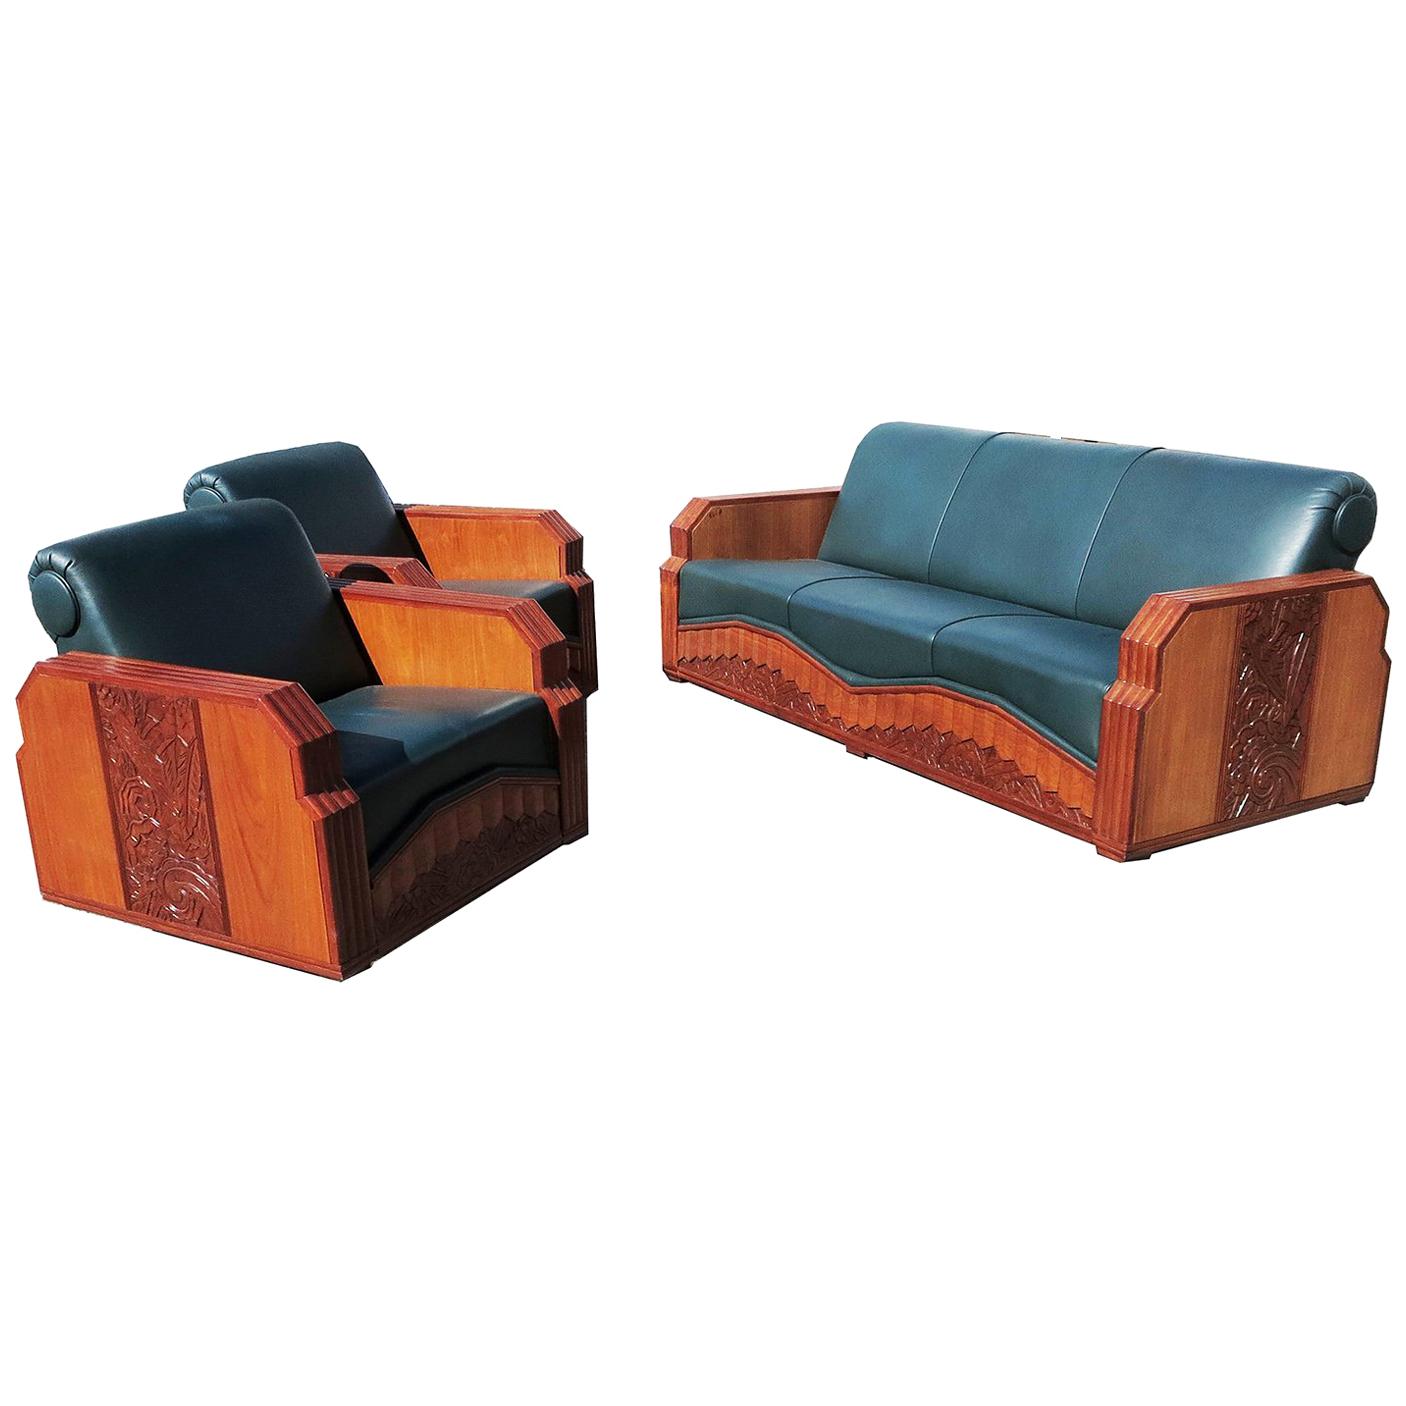 Important Art Deco Sofa Set from Hollywood Pantages Theater